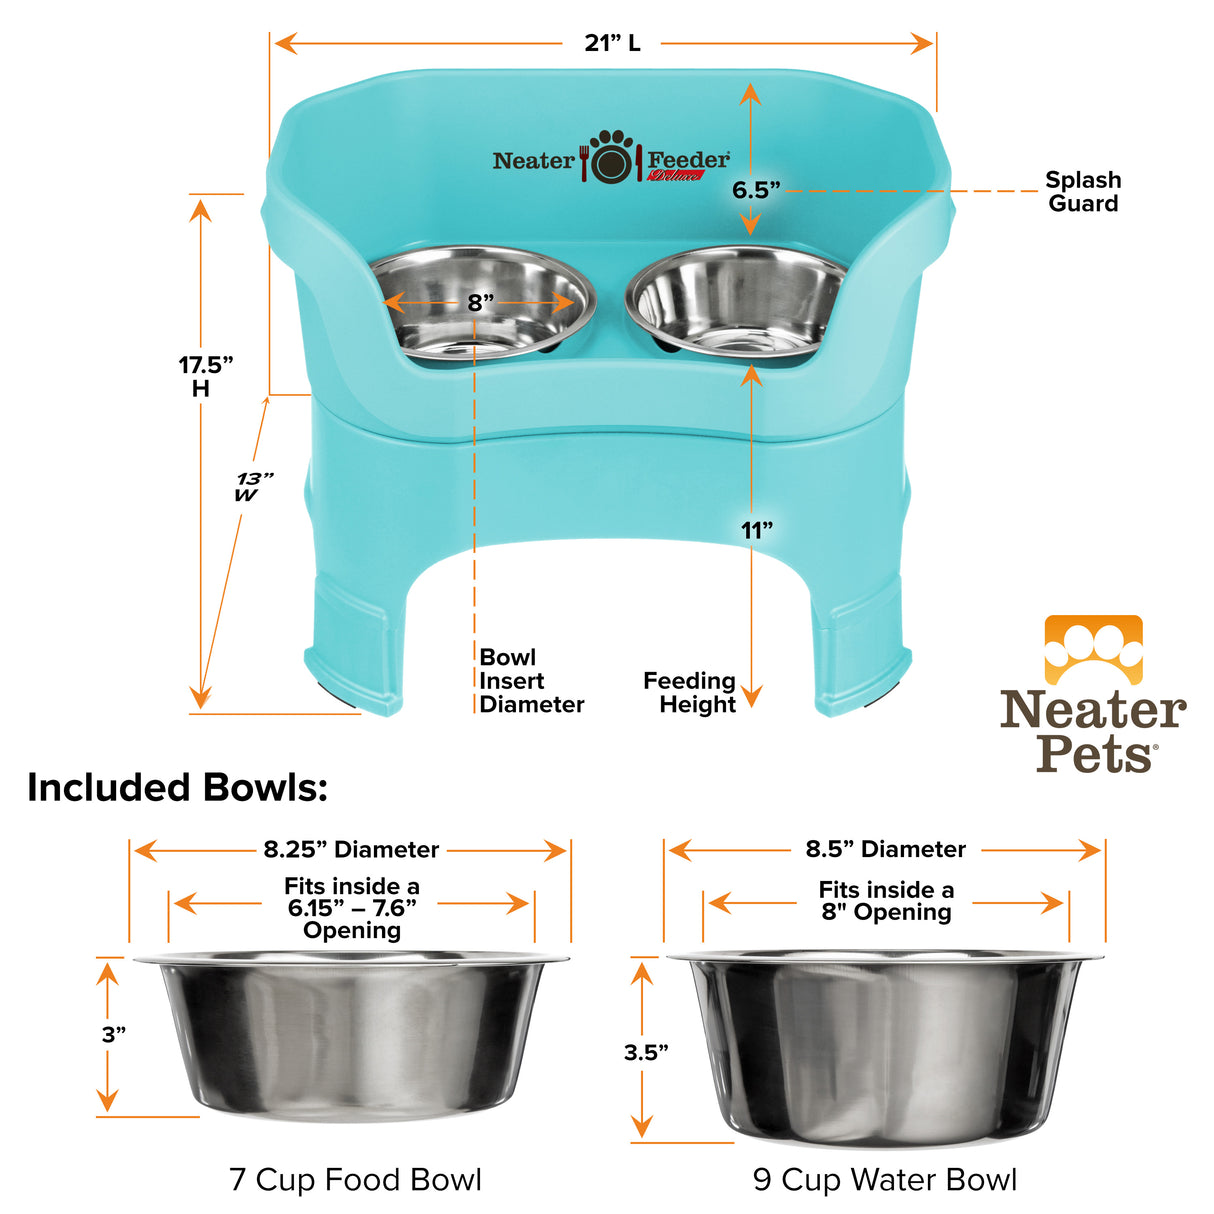 Deluxe Aqua Large Dog Neater Feeder with leg extensions and Bowl dimensions